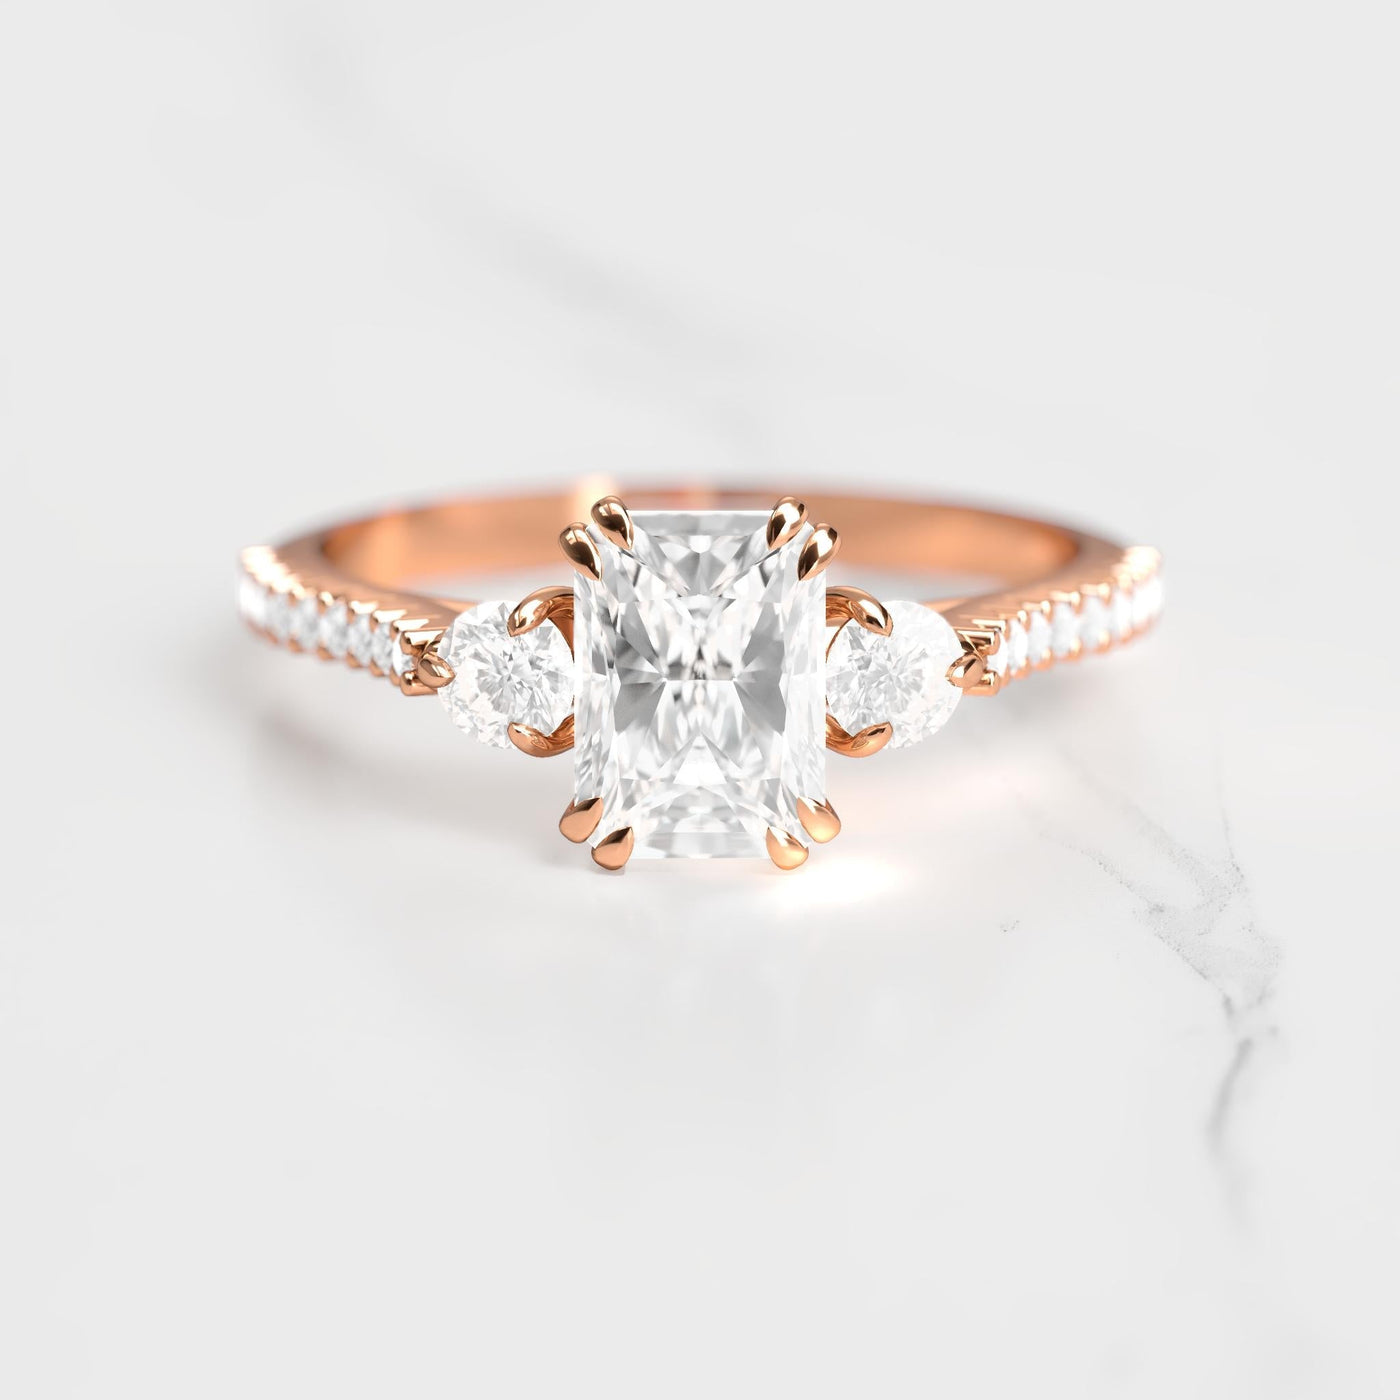 Radiant half pave white diamond ring with accent stones